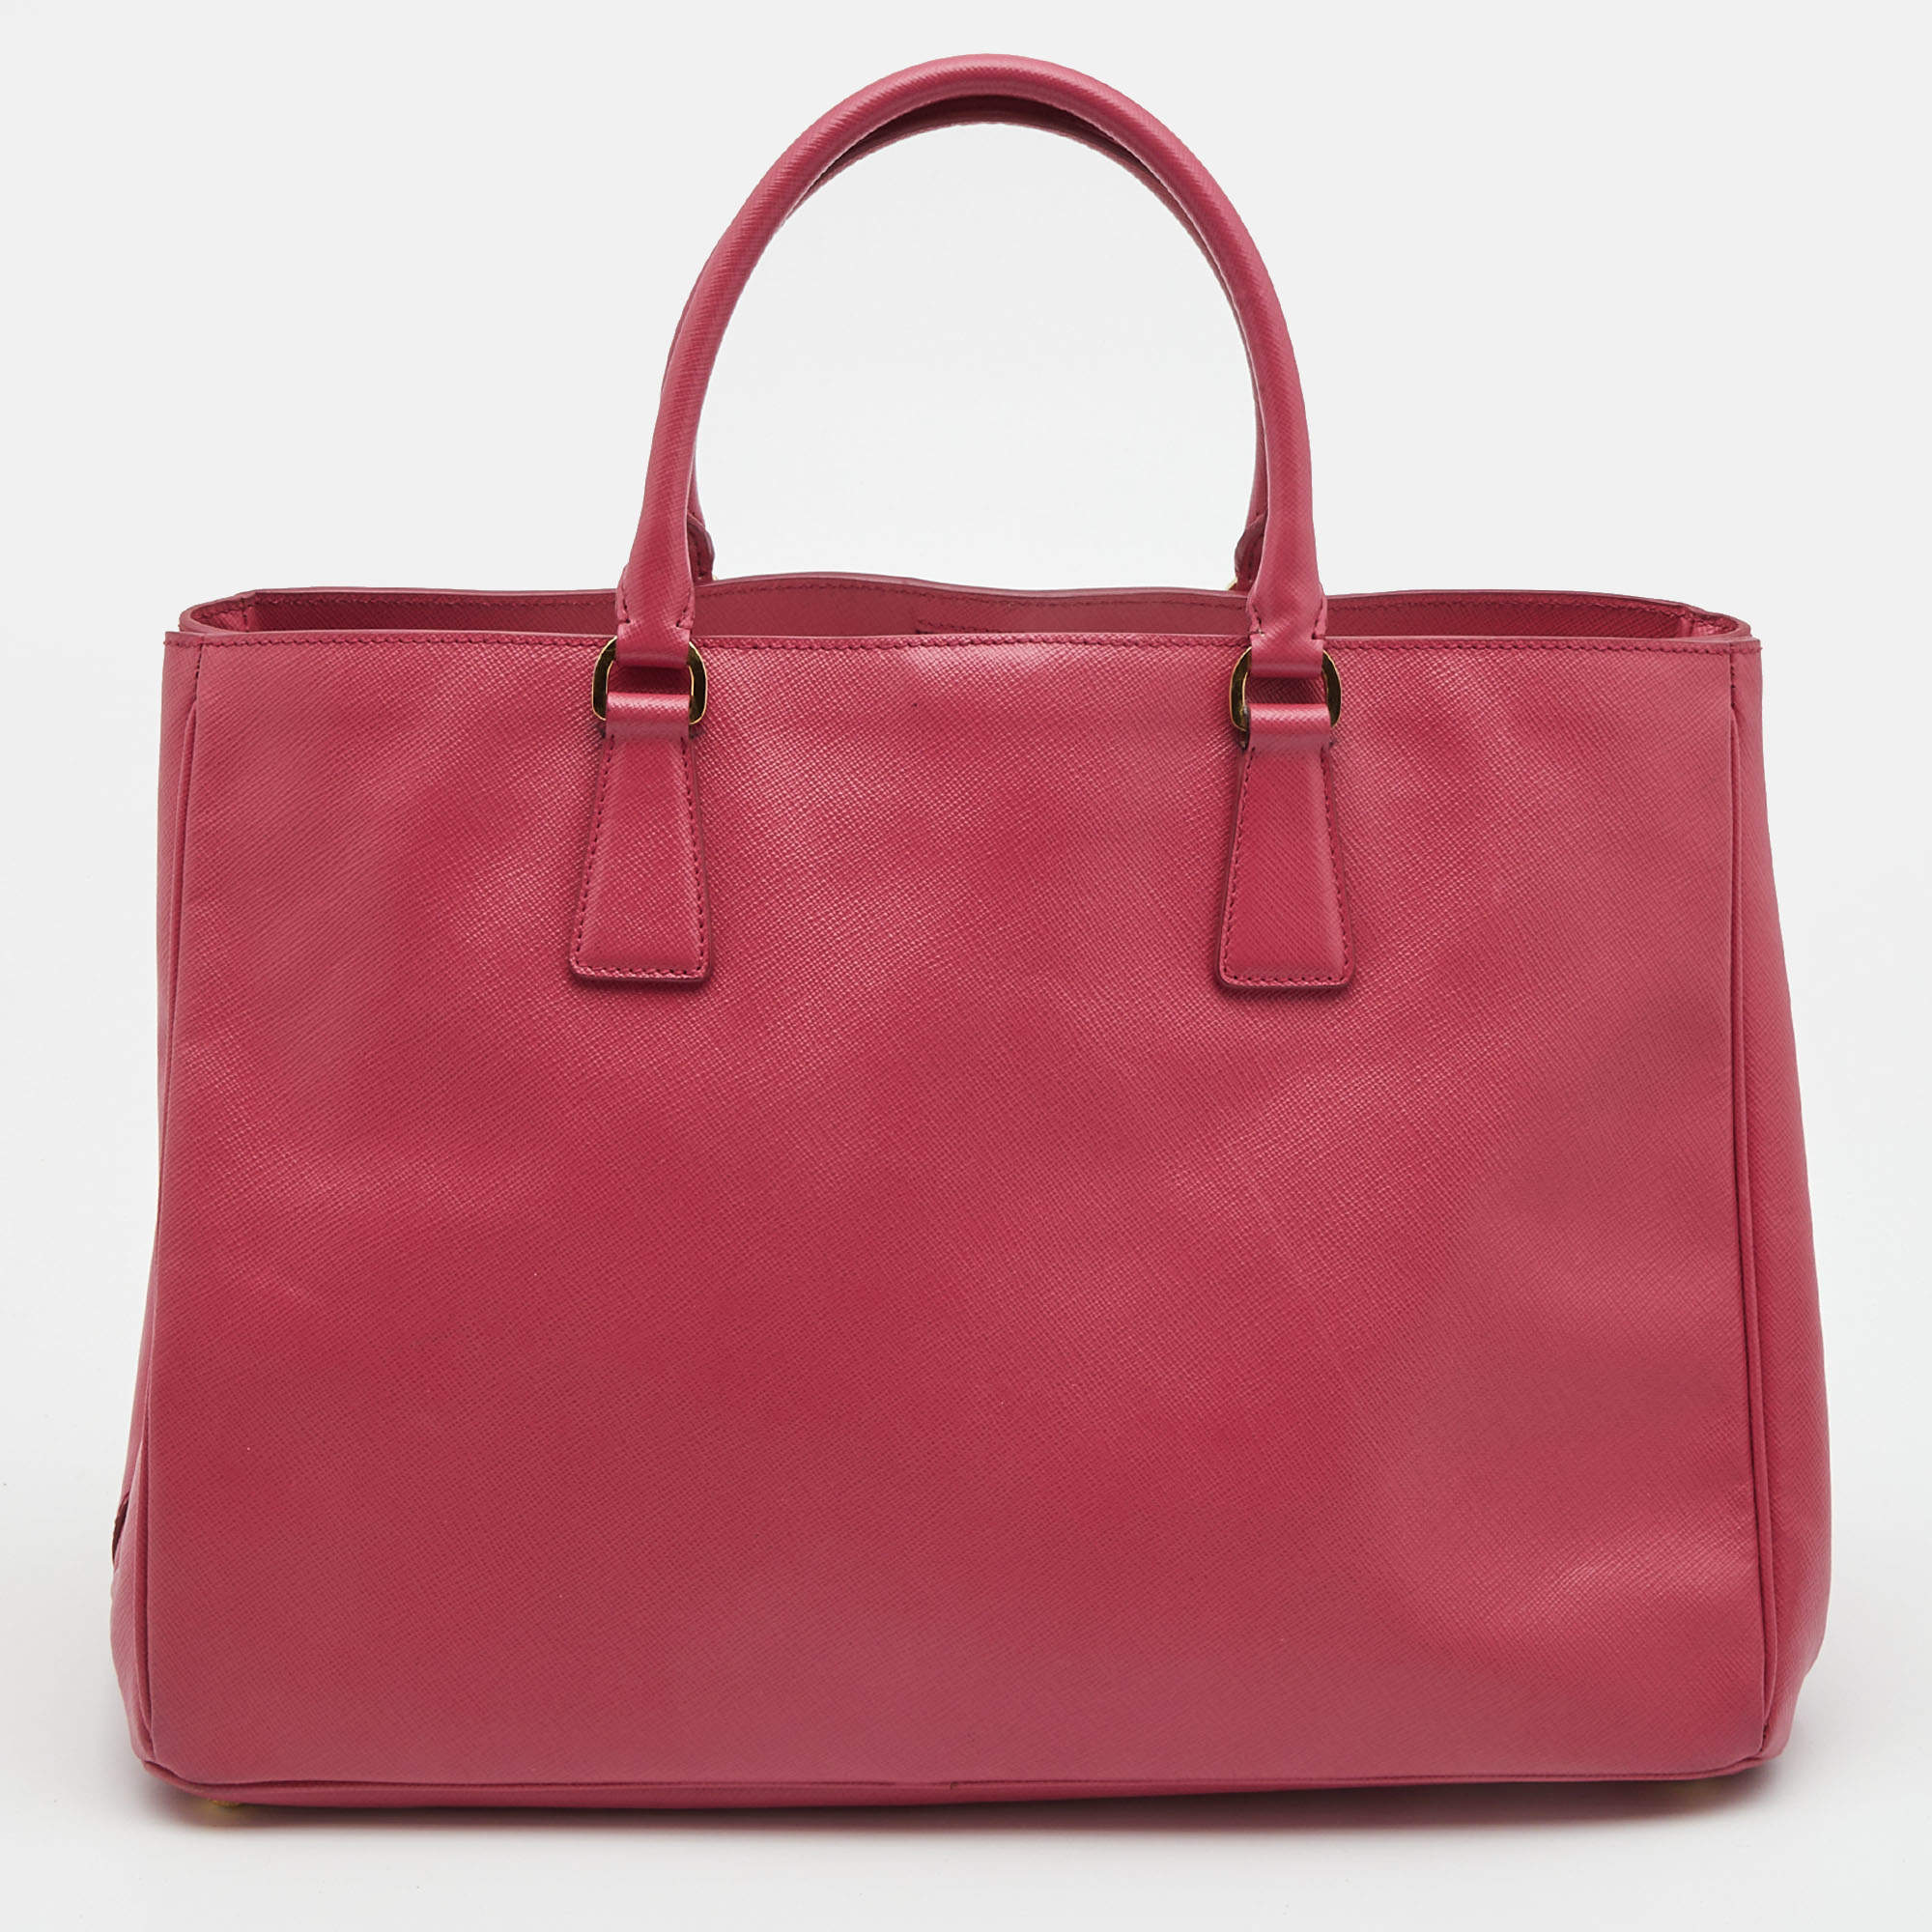 PRADA Galleria Large Double Zip Saffiano Leather Tote Bag Pink